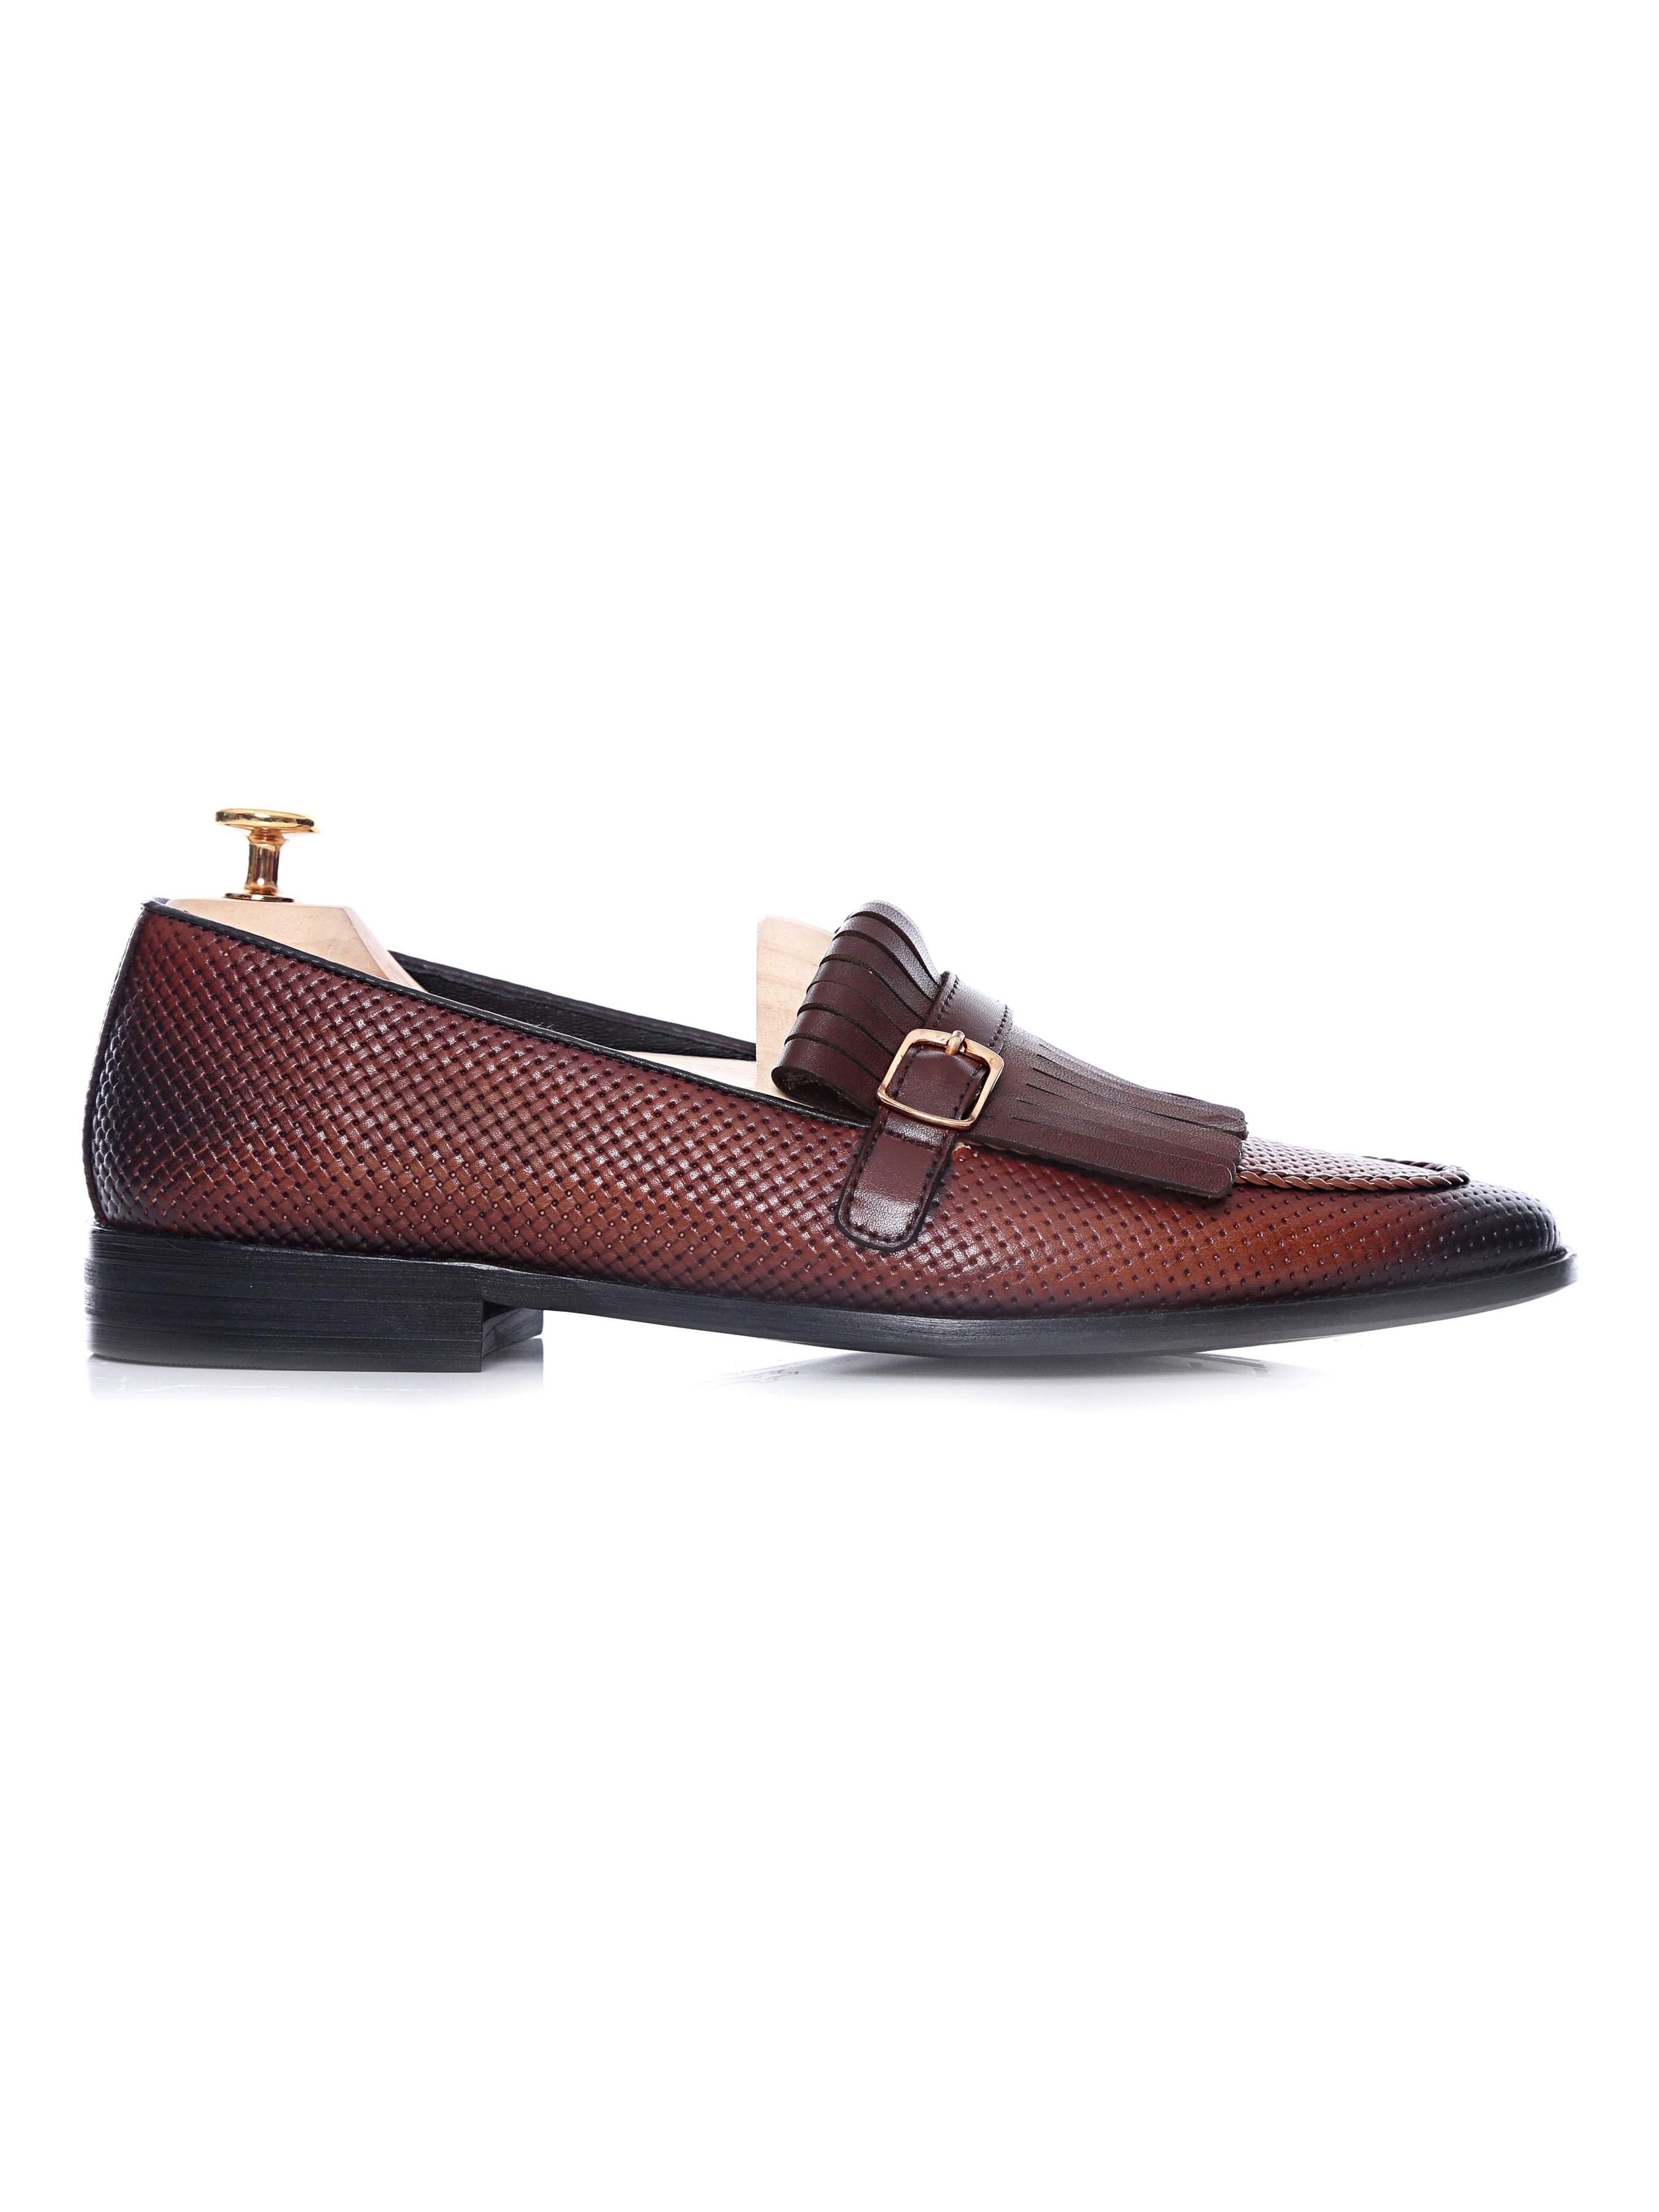 Fringe Kiltie Loafer - Cognac Tan Woven Leather with Side Buckle (Hand Painted Patina) - Zeve Shoes